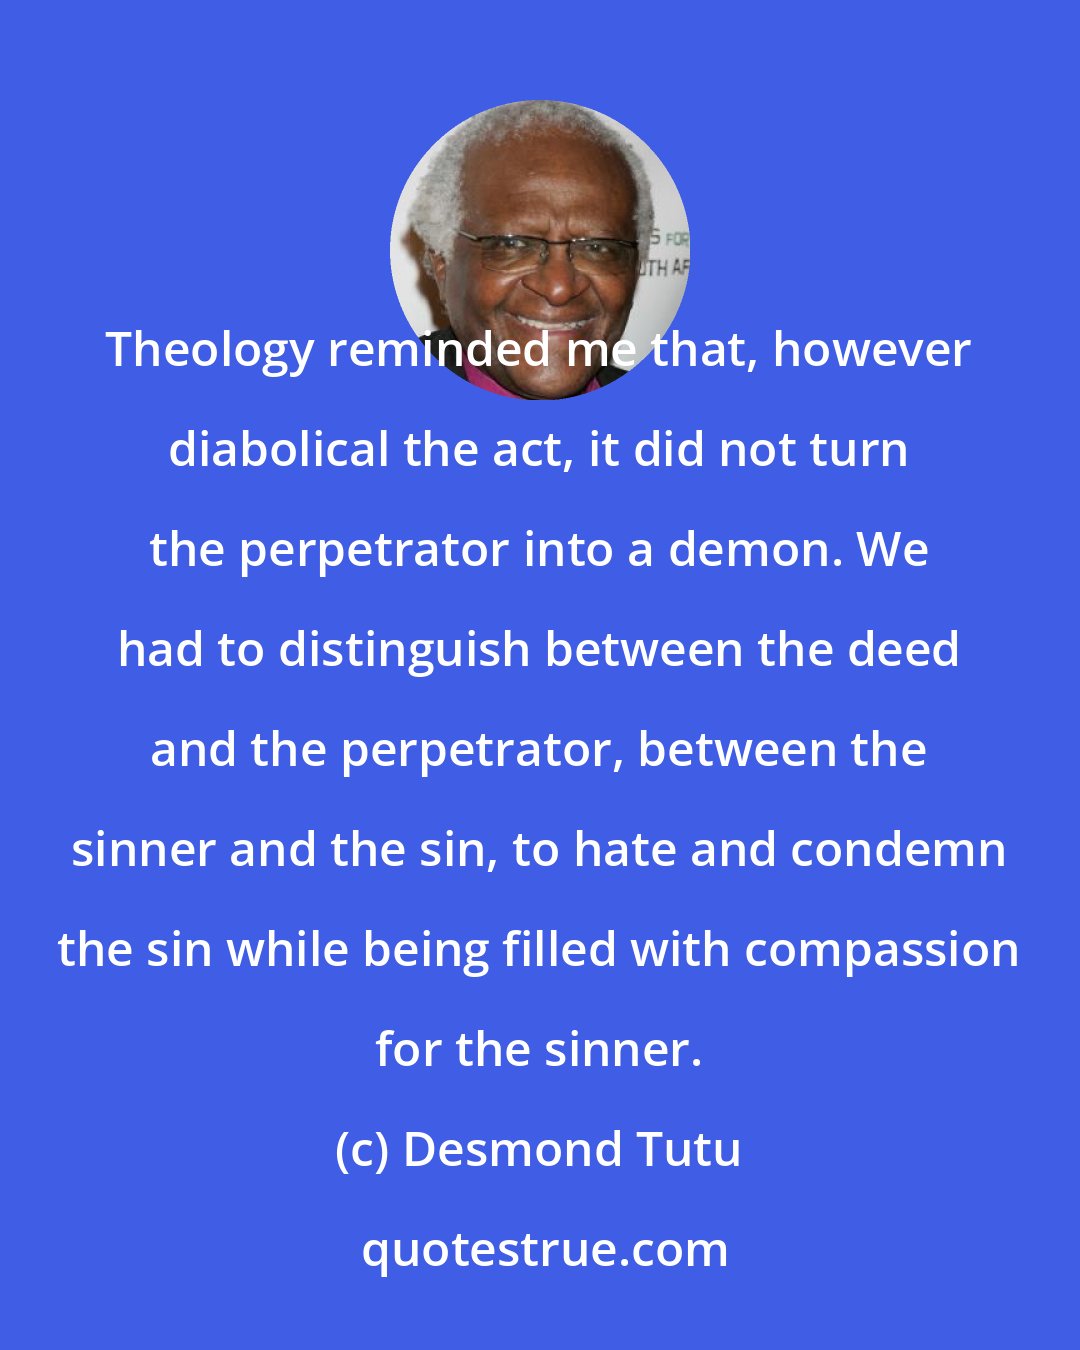 Desmond Tutu: Theology reminded me that, however diabolical the act, it did not turn the perpetrator into a demon. We had to distinguish between the deed and the perpetrator, between the sinner and the sin, to hate and condemn the sin while being filled with compassion for the sinner.